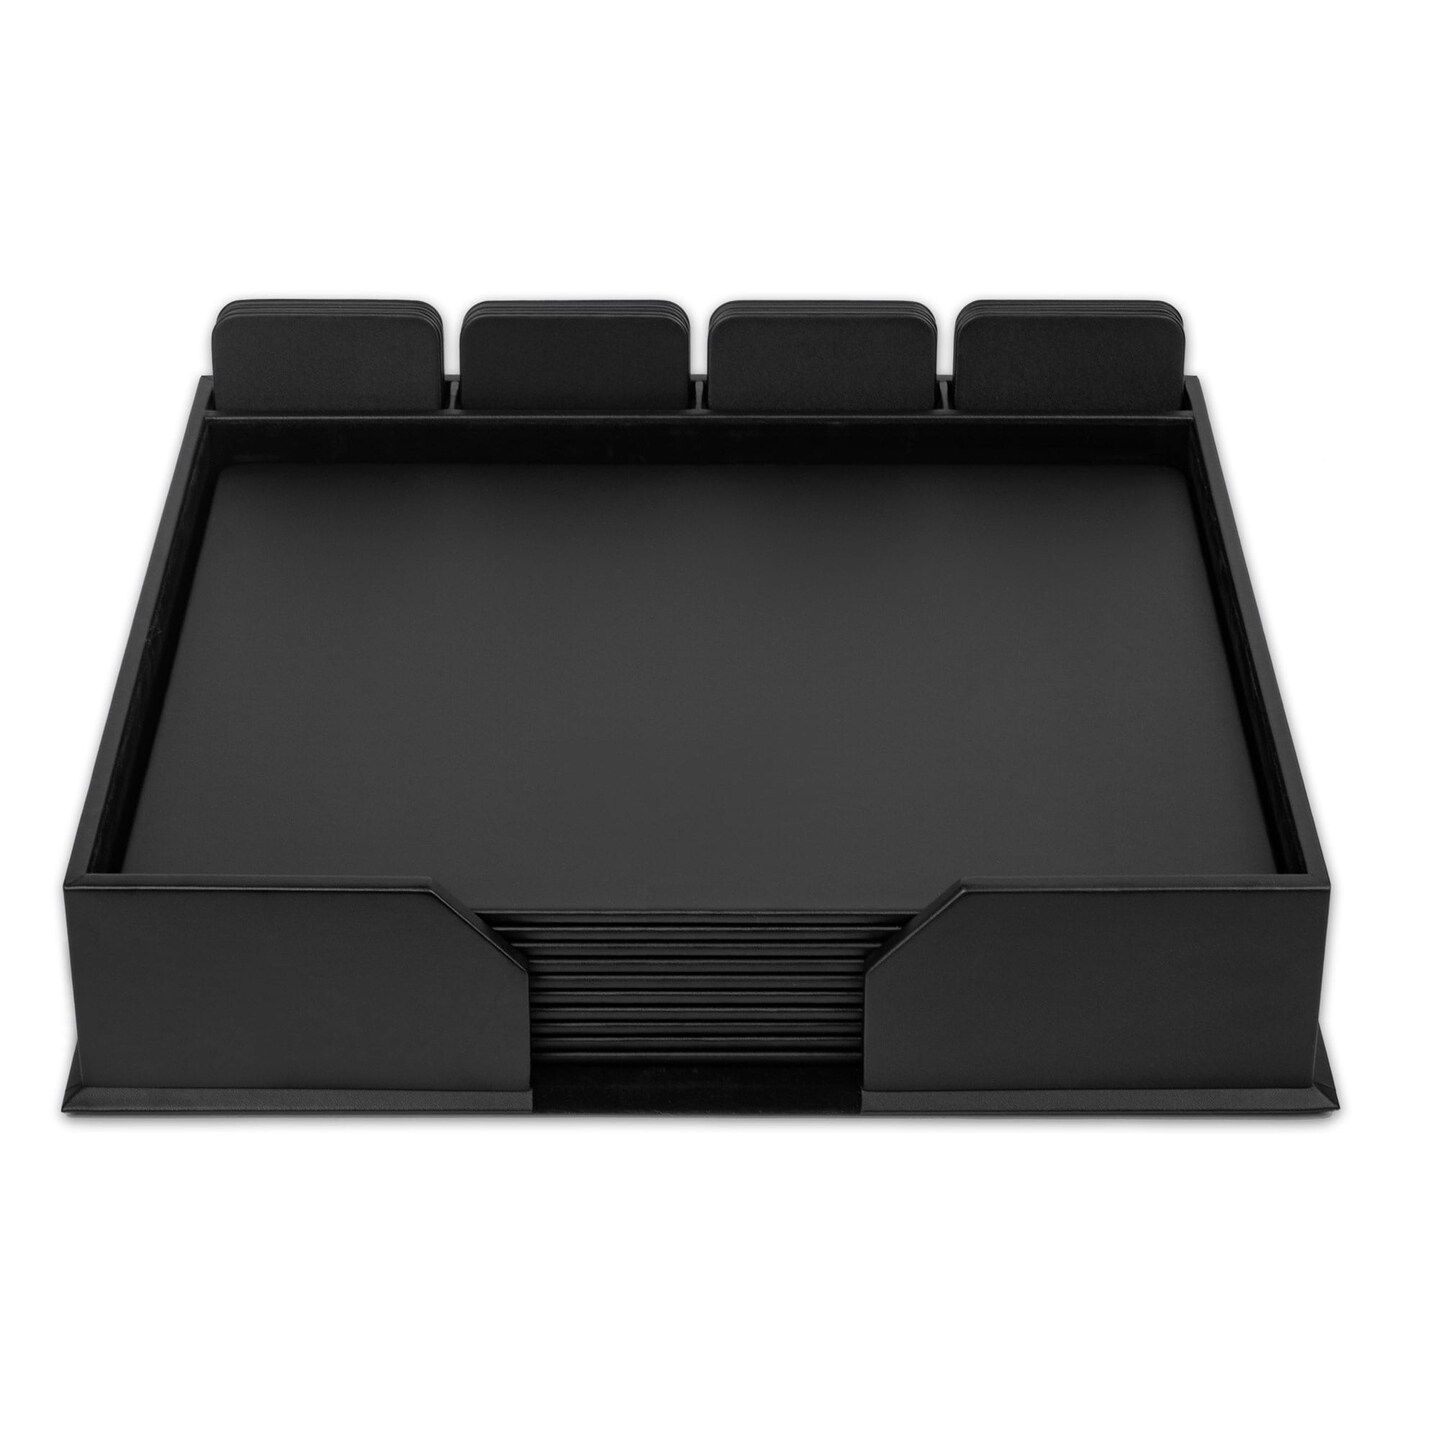 Black Leatherette 23-Piece Conf. Room Set with Square Coasters